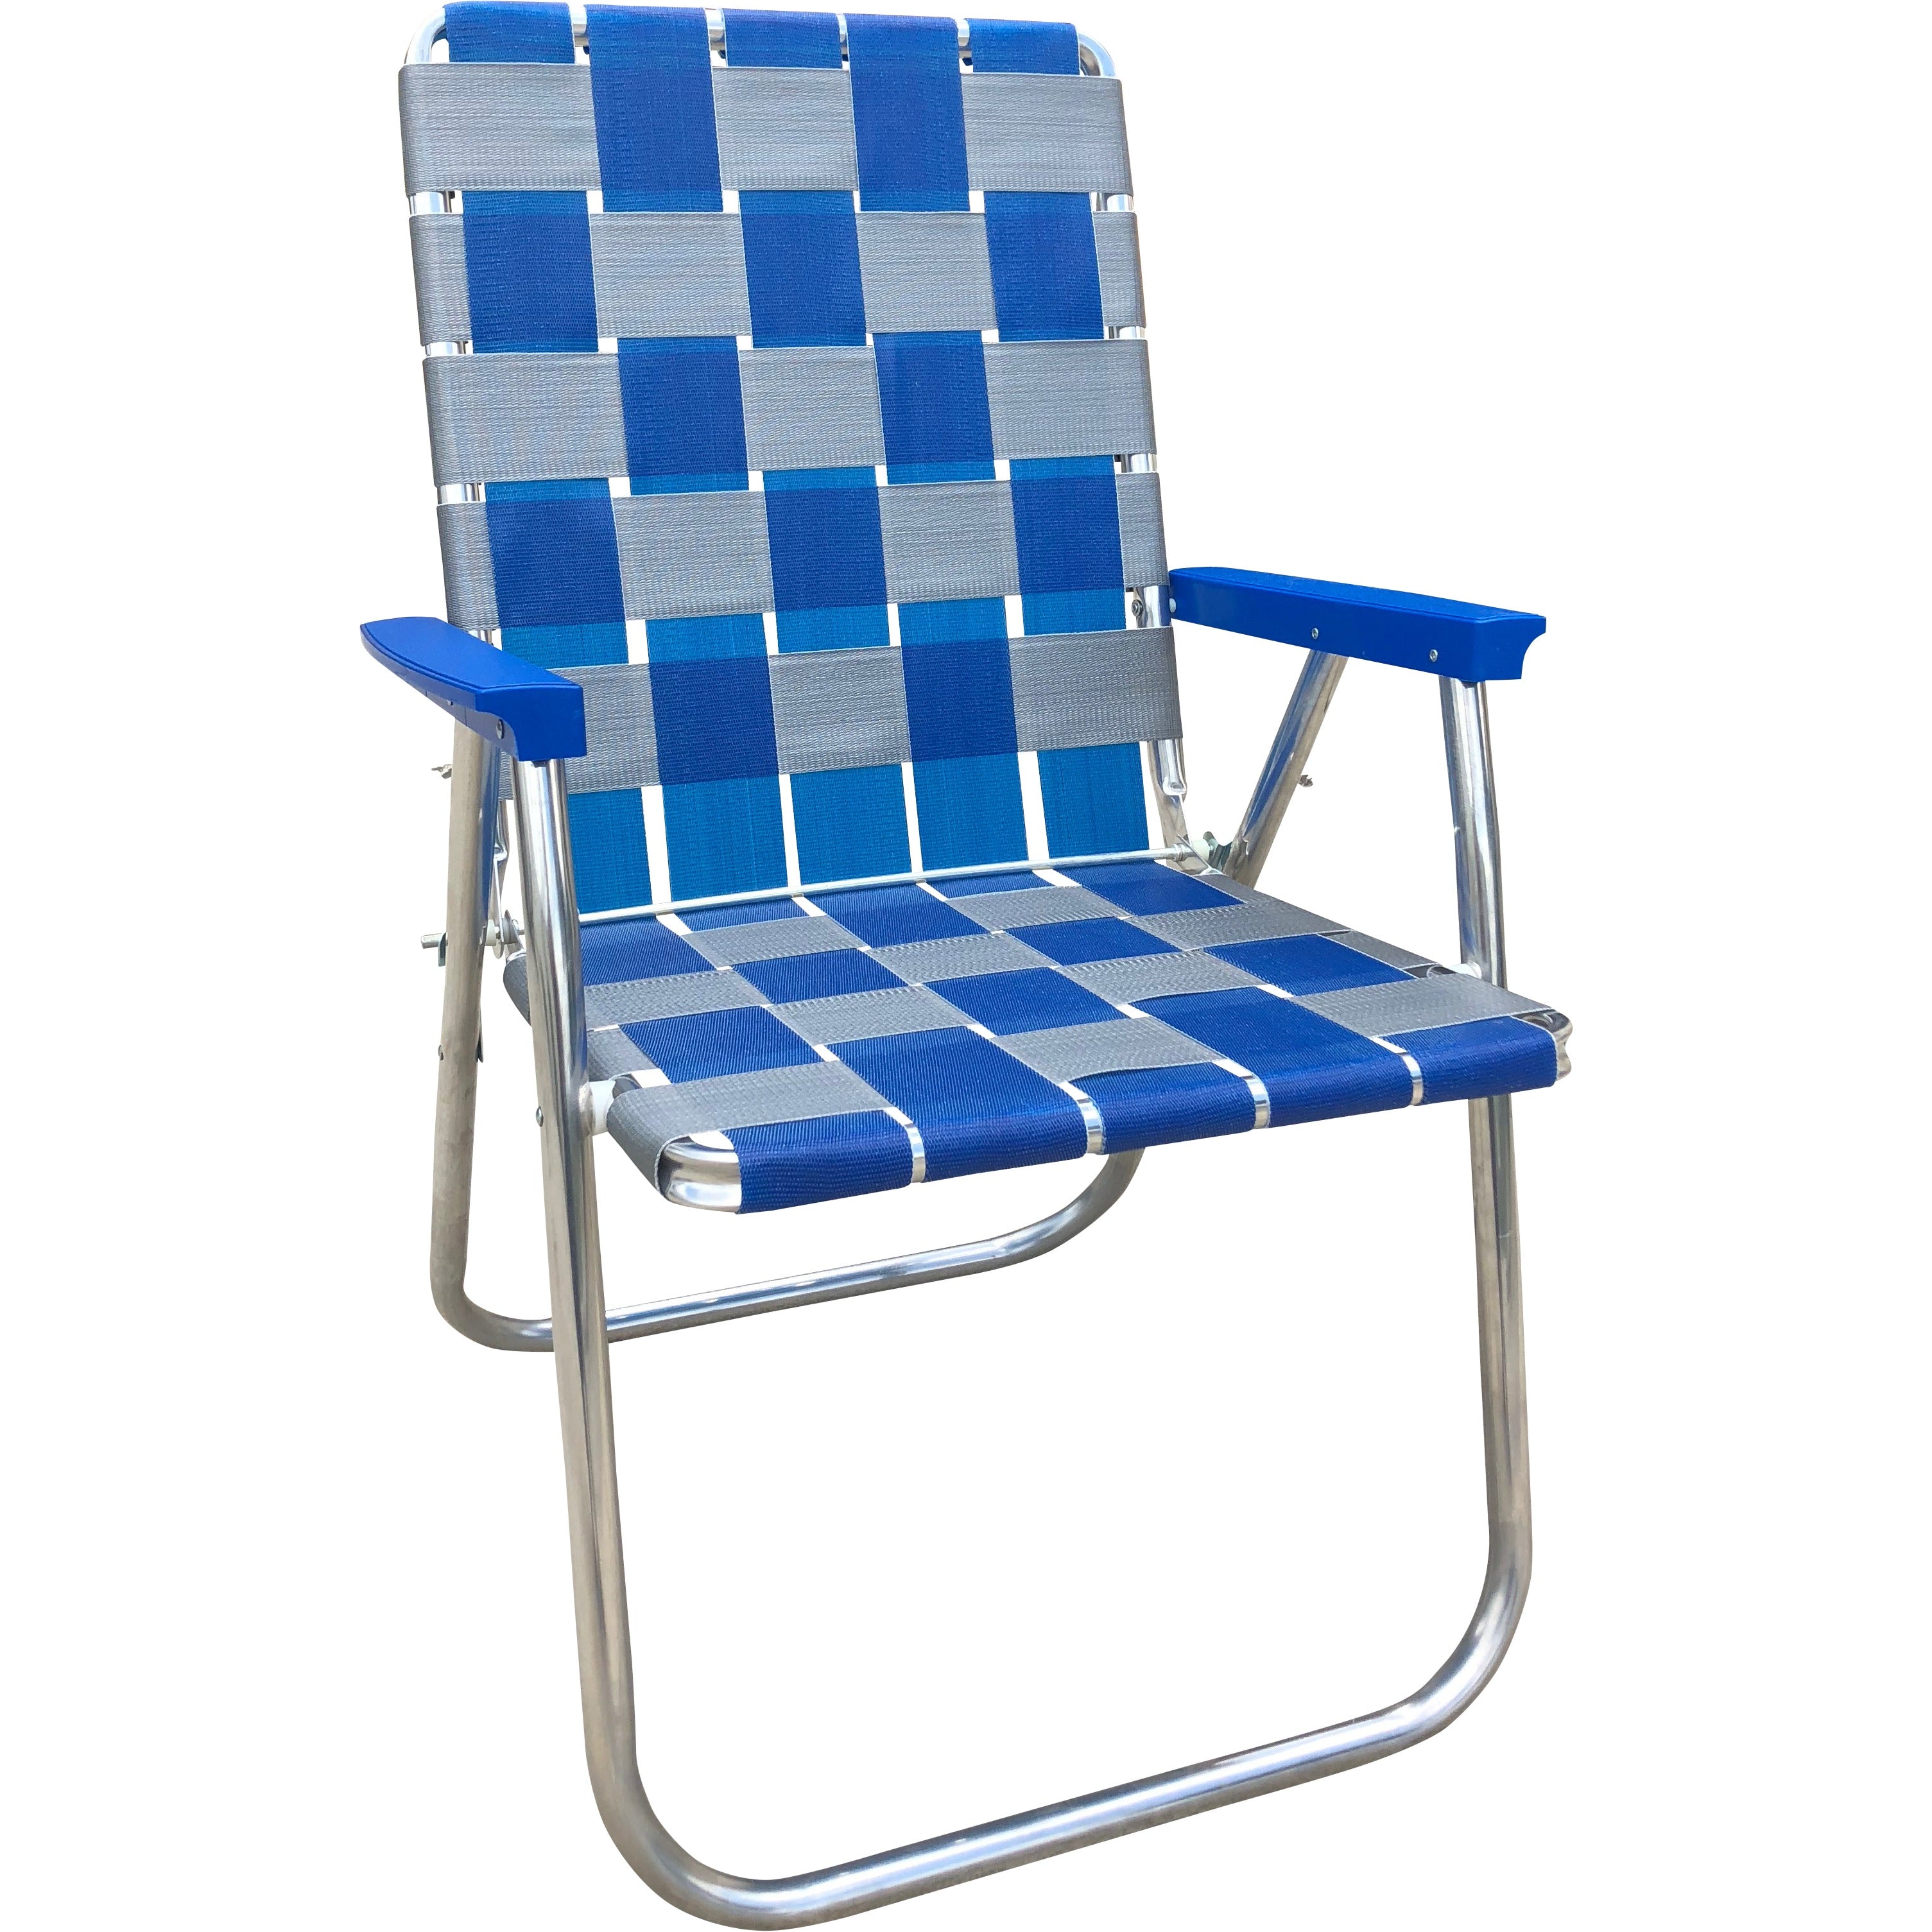 Lawn Chair USA - Classic Folding Aluminum Webbed Chair - Durable, Portable, and Comfortable Outdoor Chair - Ideal for Camping, Sports, and Concerts - Blue and Silver with Blue arms - image 1 of 7